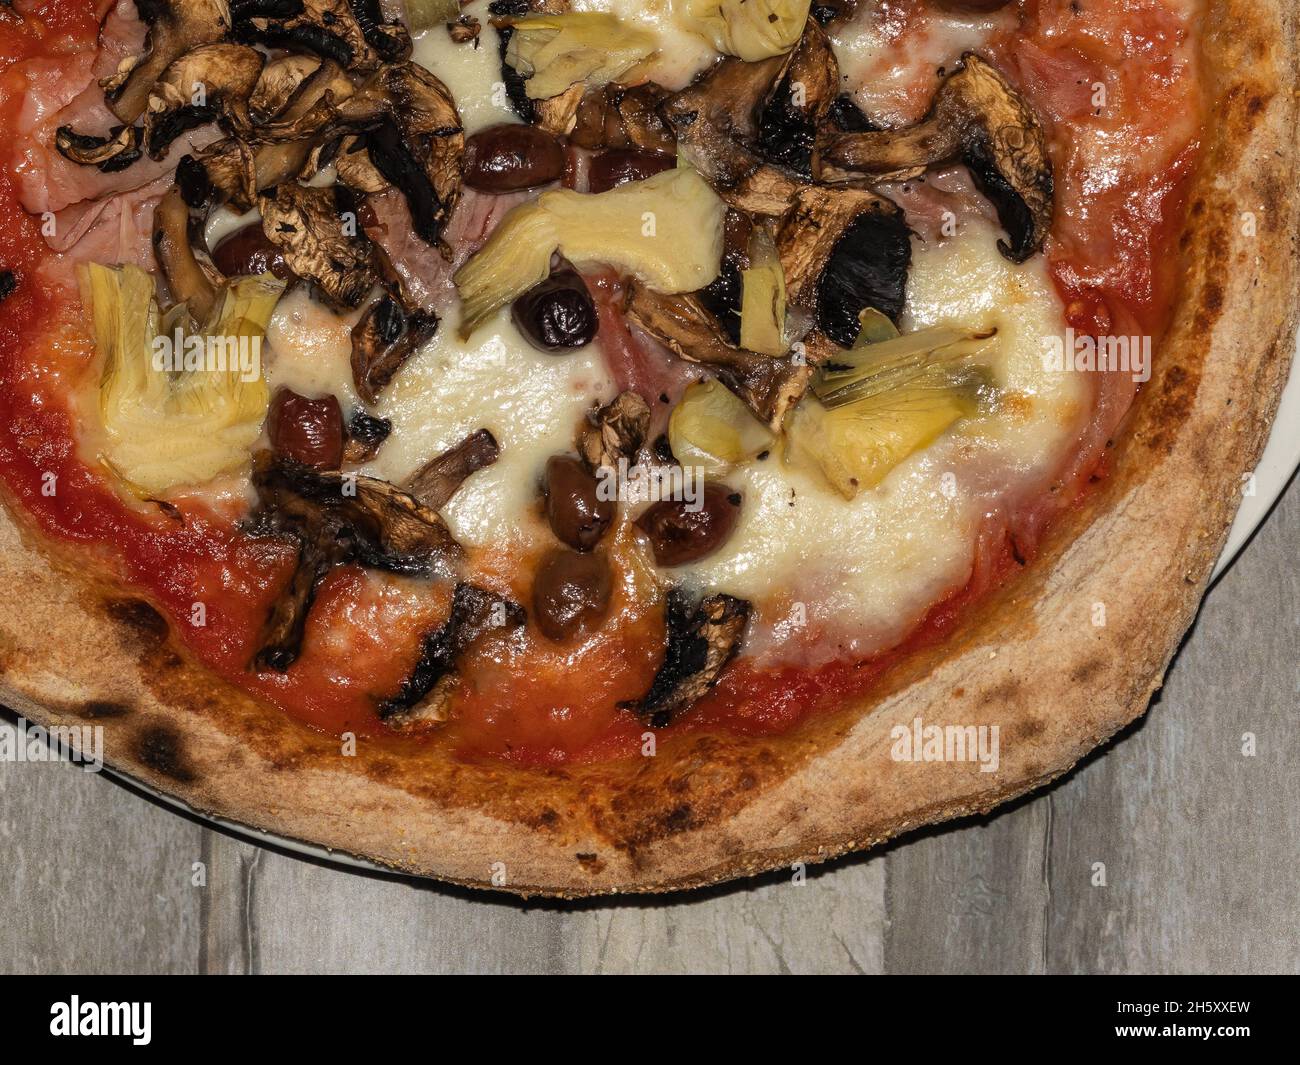 detail of stuffed pizza on wooden Stock Photo